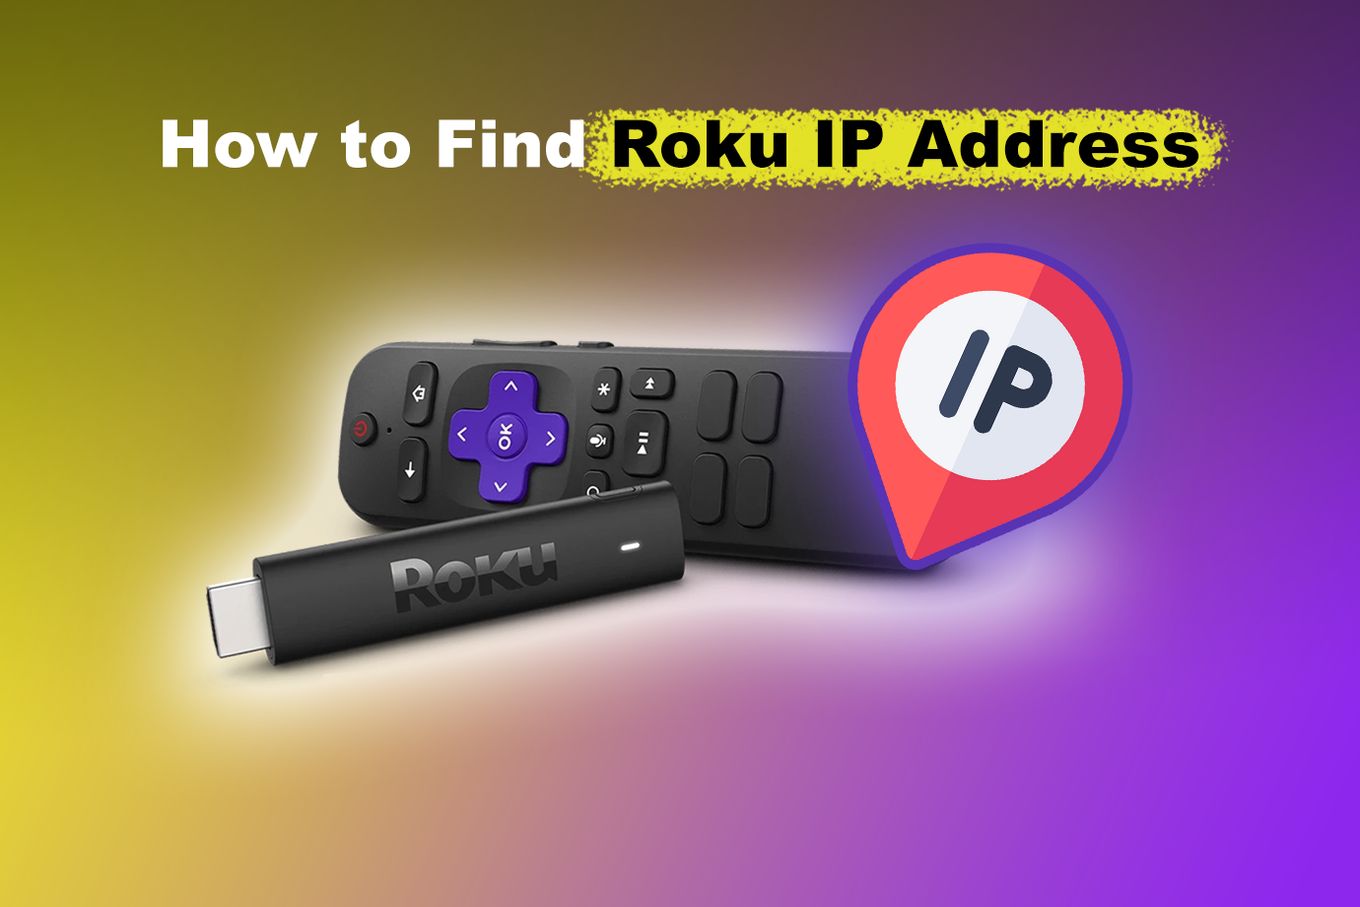 How to find your Roku IP address